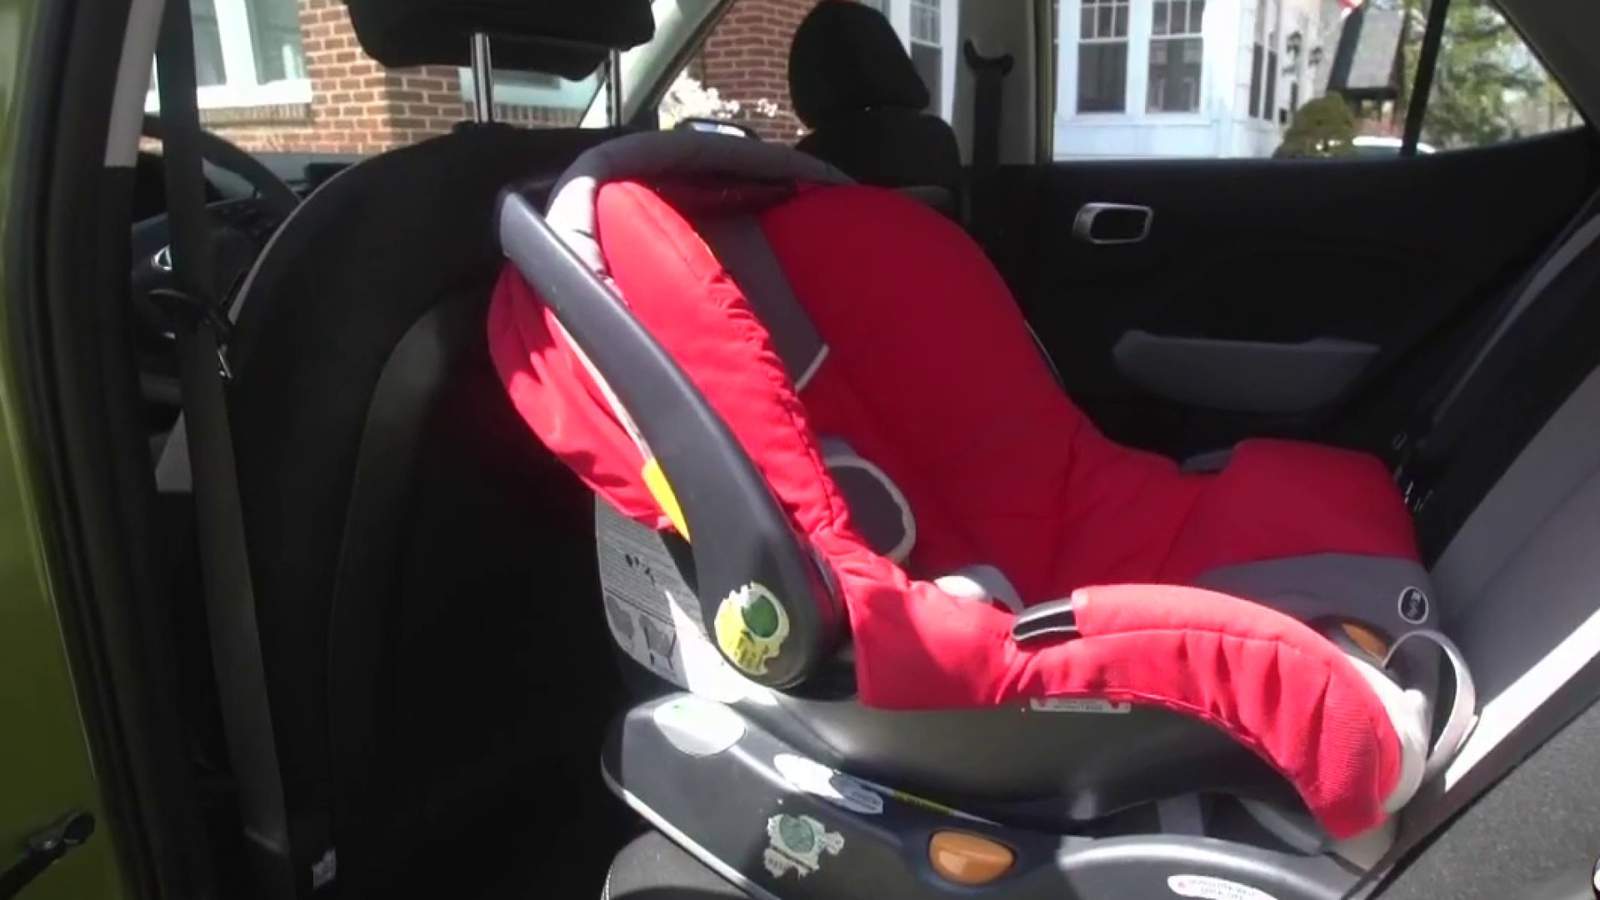 Target will give you a 20% off coupon in exchange for a used car seat